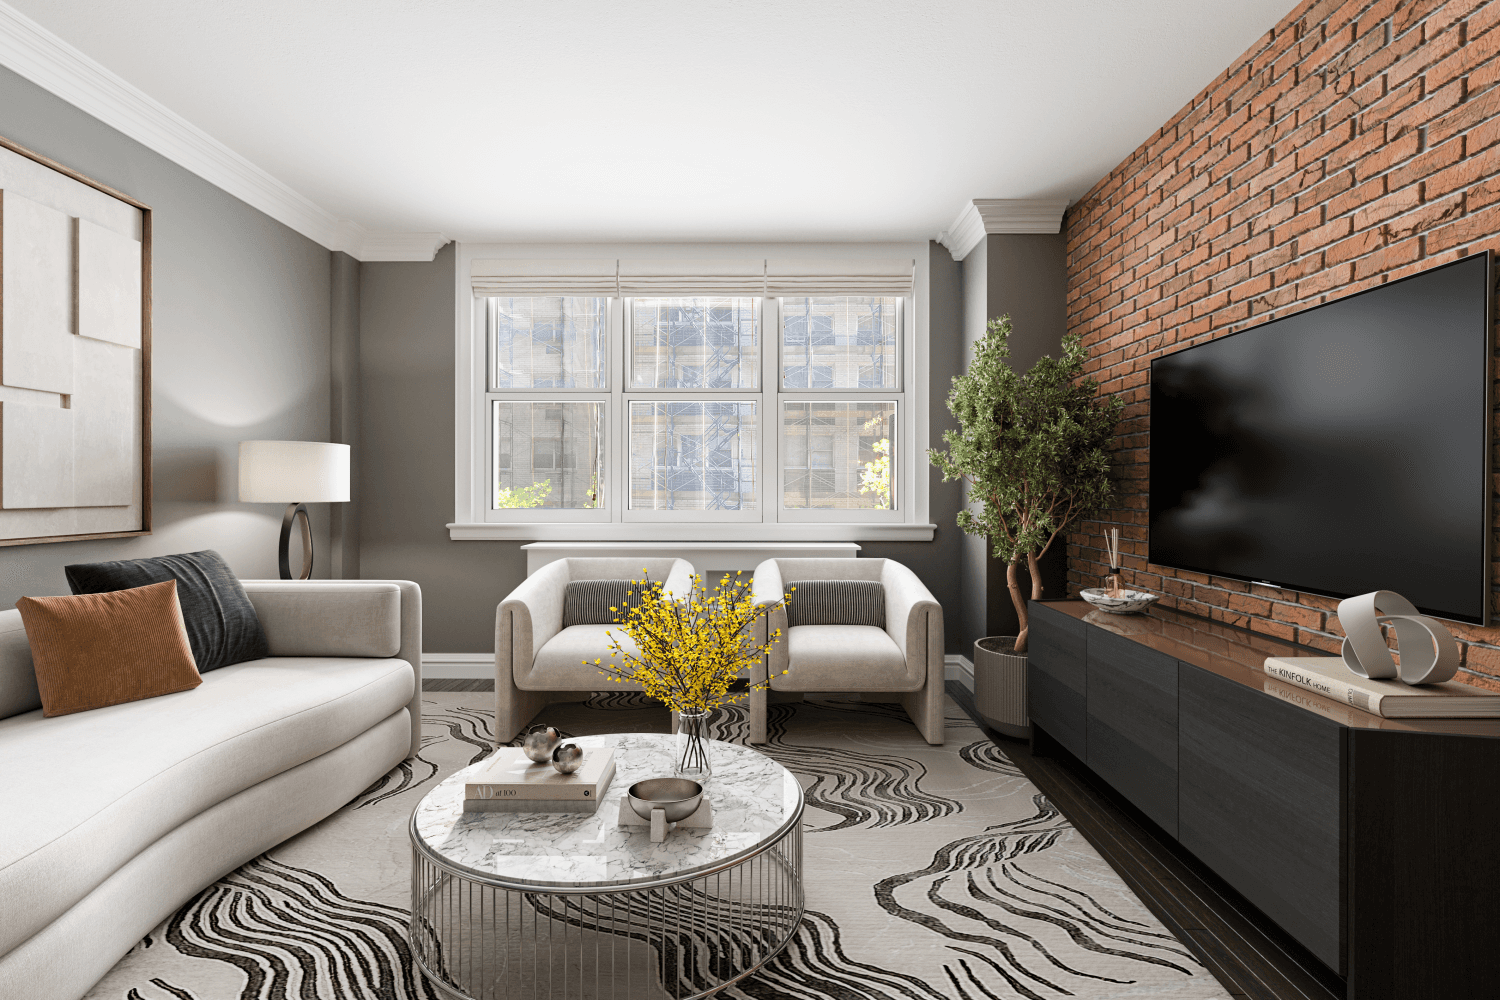 Welcome to Residence 5E, a reimagined one bedroom apartment at 240 East 35th Street, The Murray Hill, a full service co op delighted to offer 24 hour doorman service, a ...